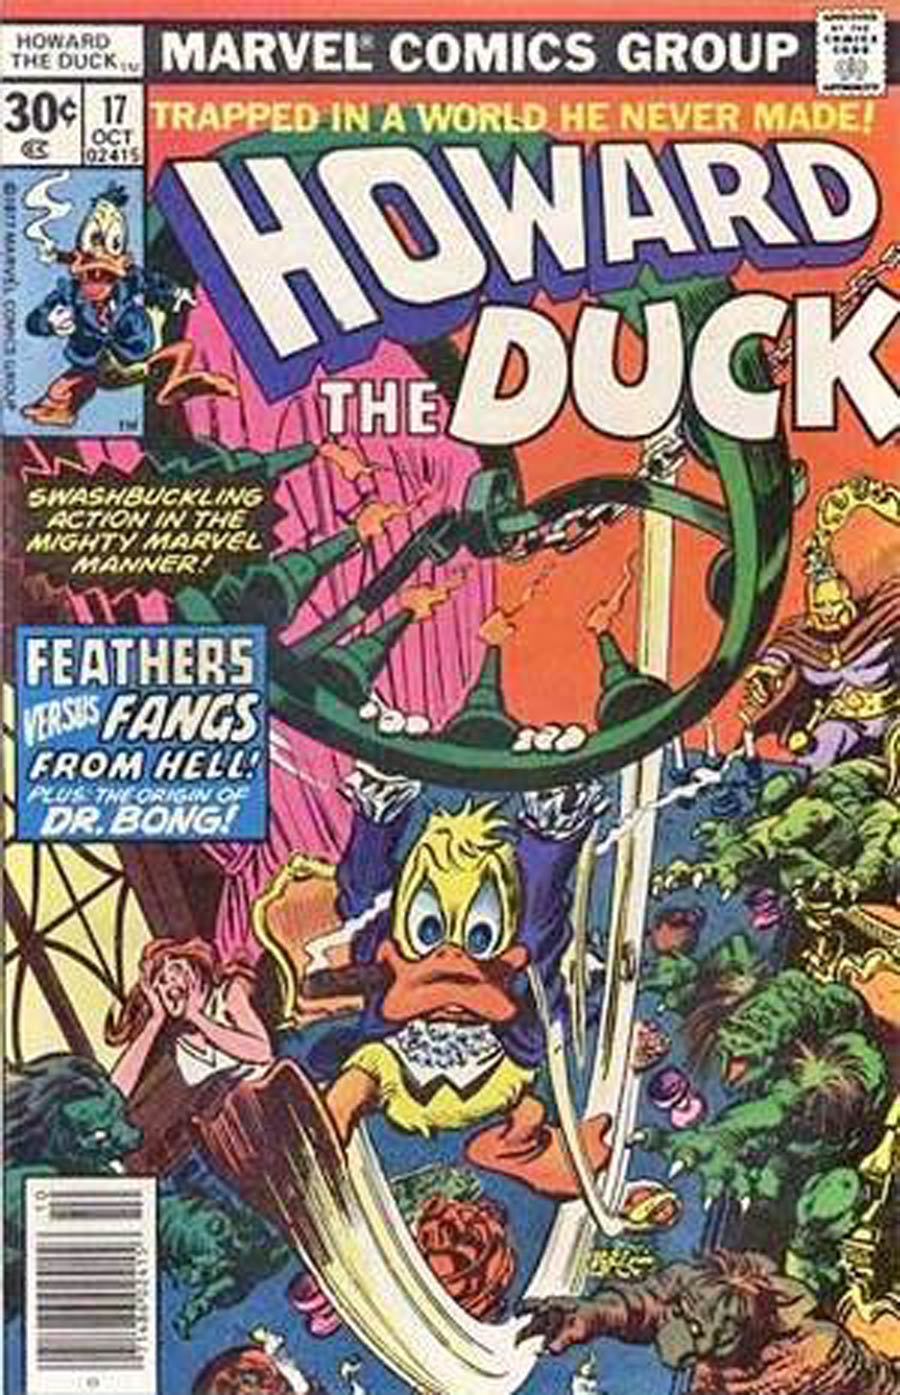 Howard The Duck Vol 1 #17 Cover A 30-Cent Regular Edition